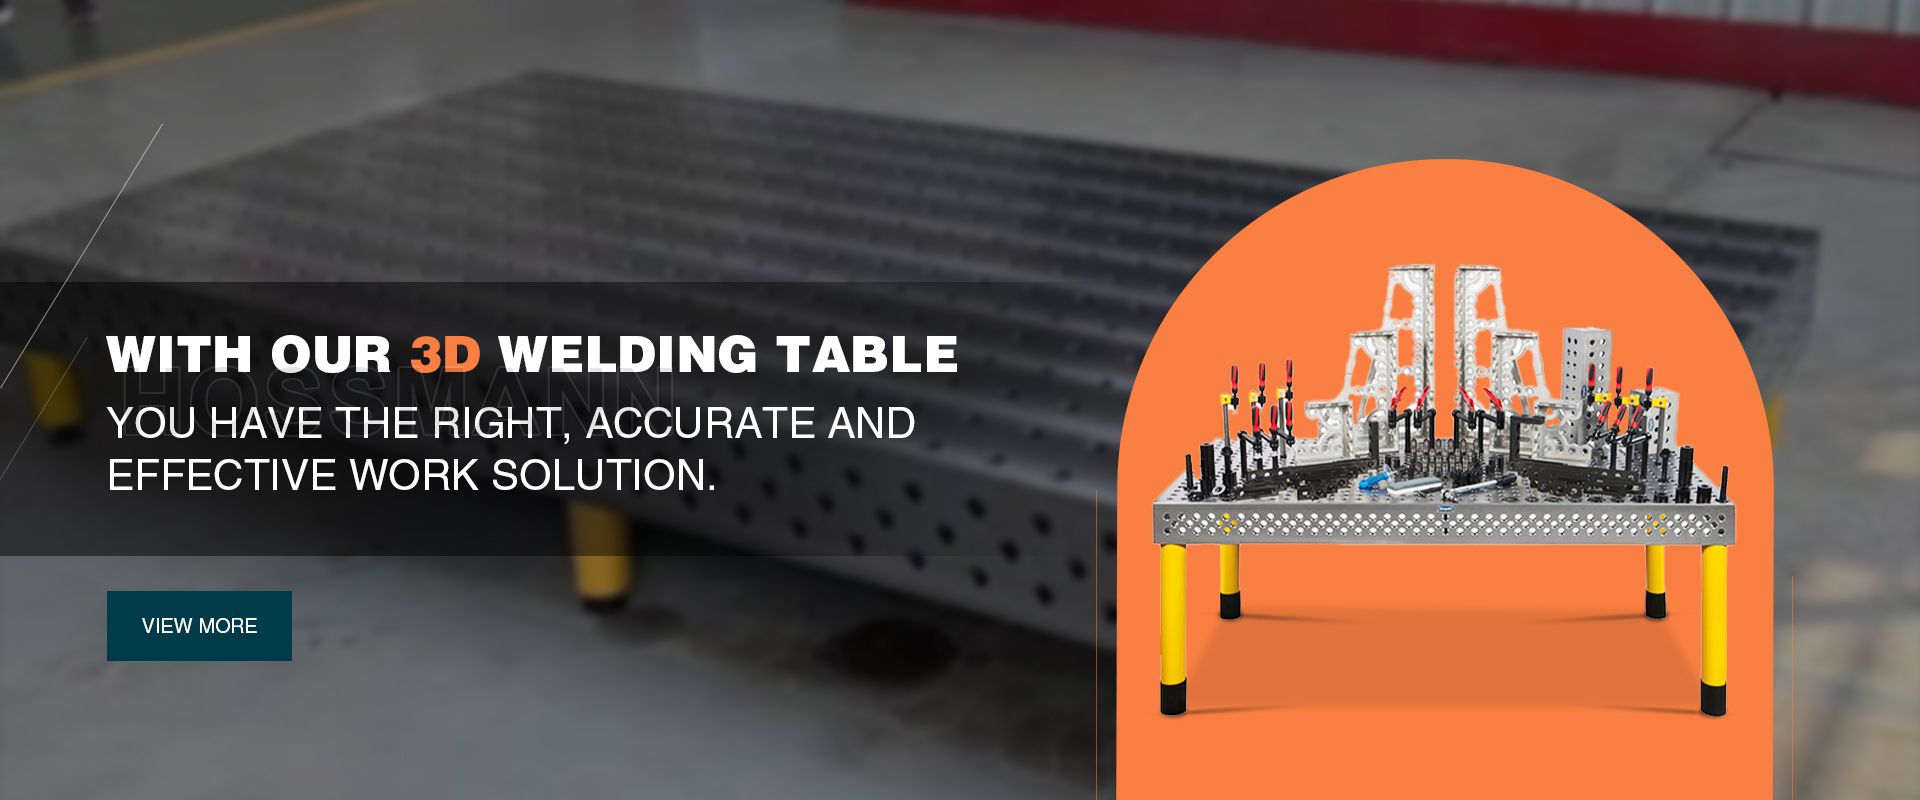 3D Welding Table With Pipe Fittings